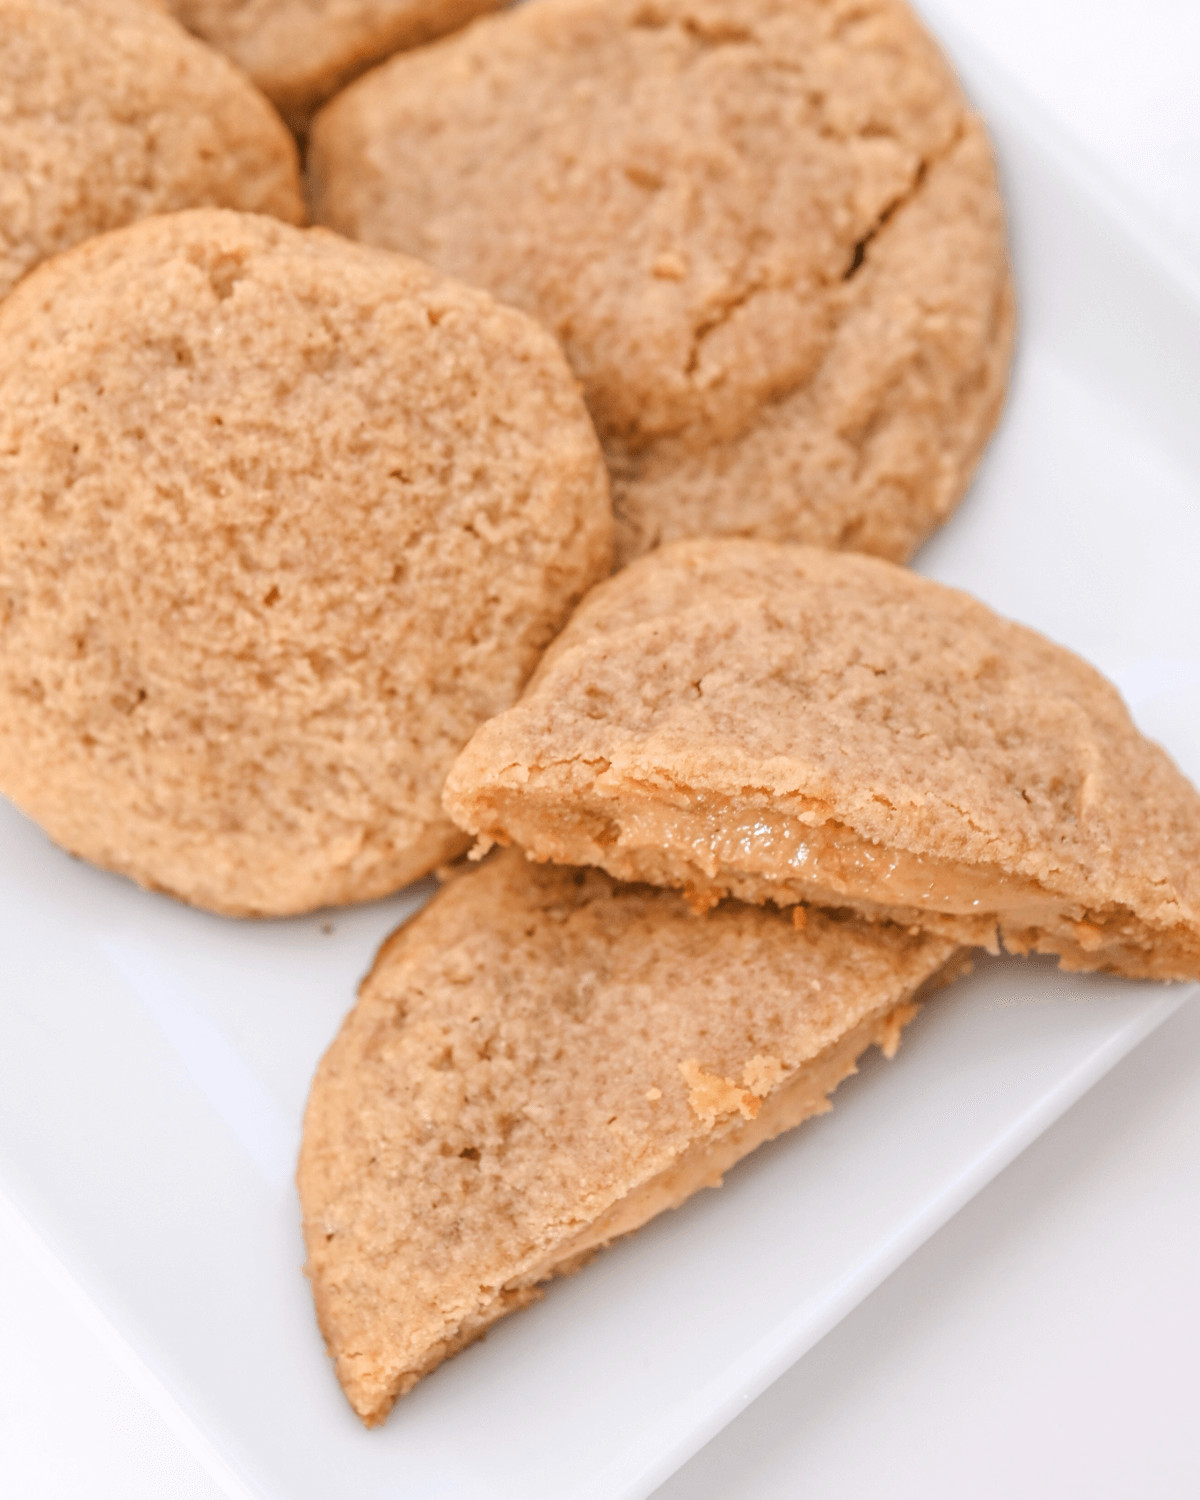 Peanut butter stuffed cookies on a white plate.